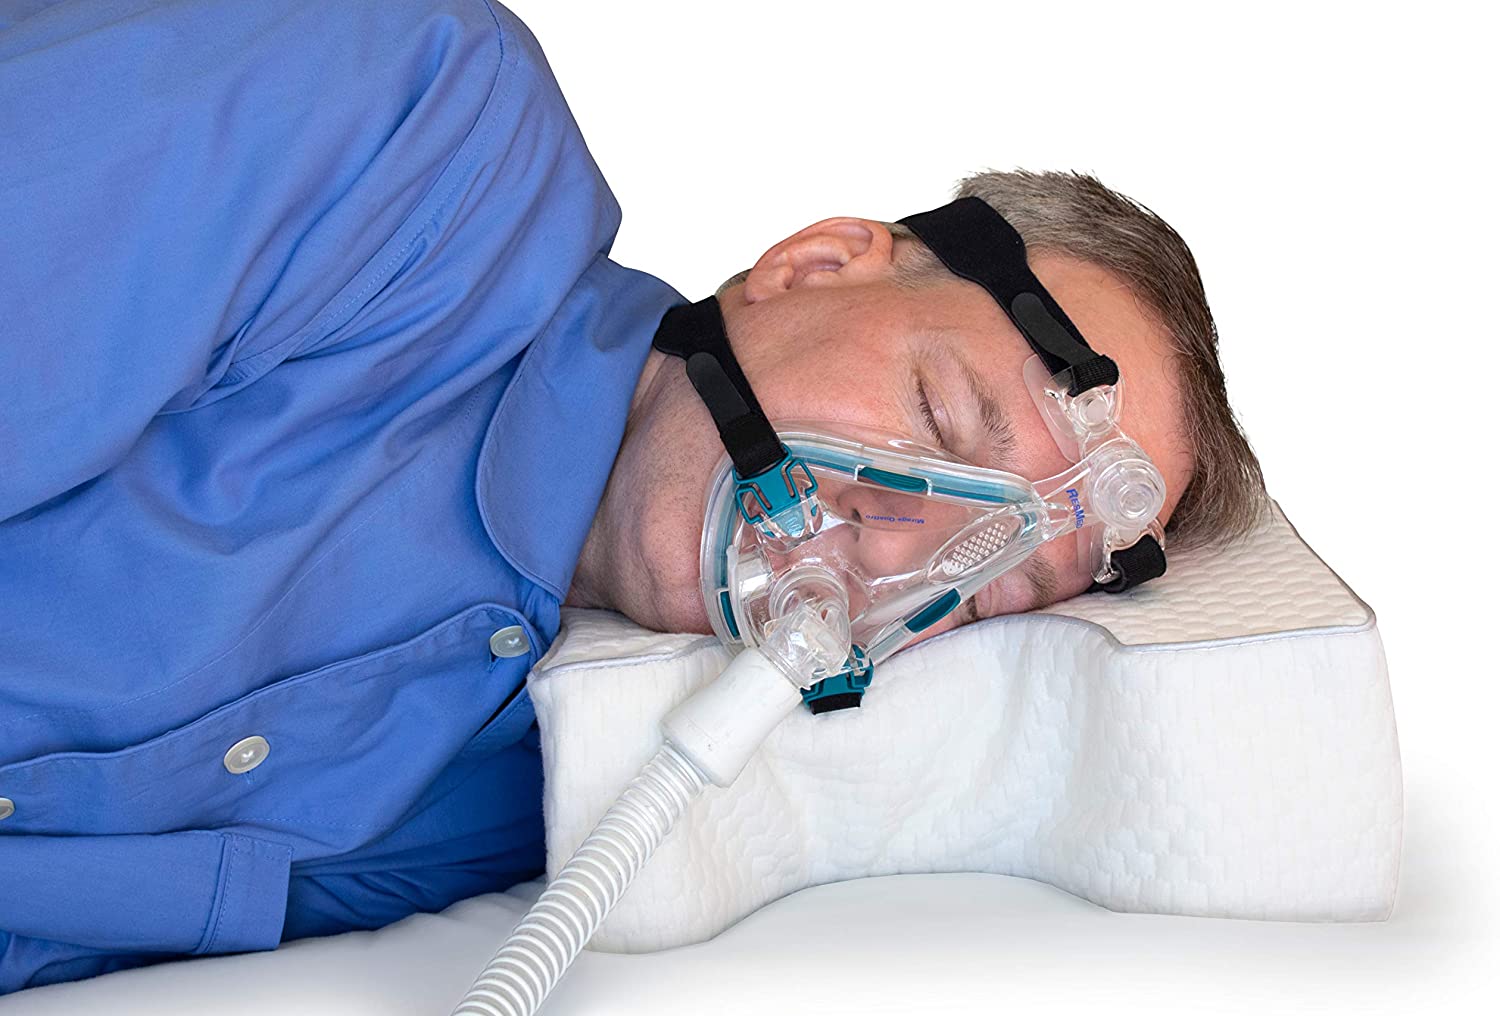 Best CPAP Pillows of 2023: 5 Top-Rated CPAP Pillows